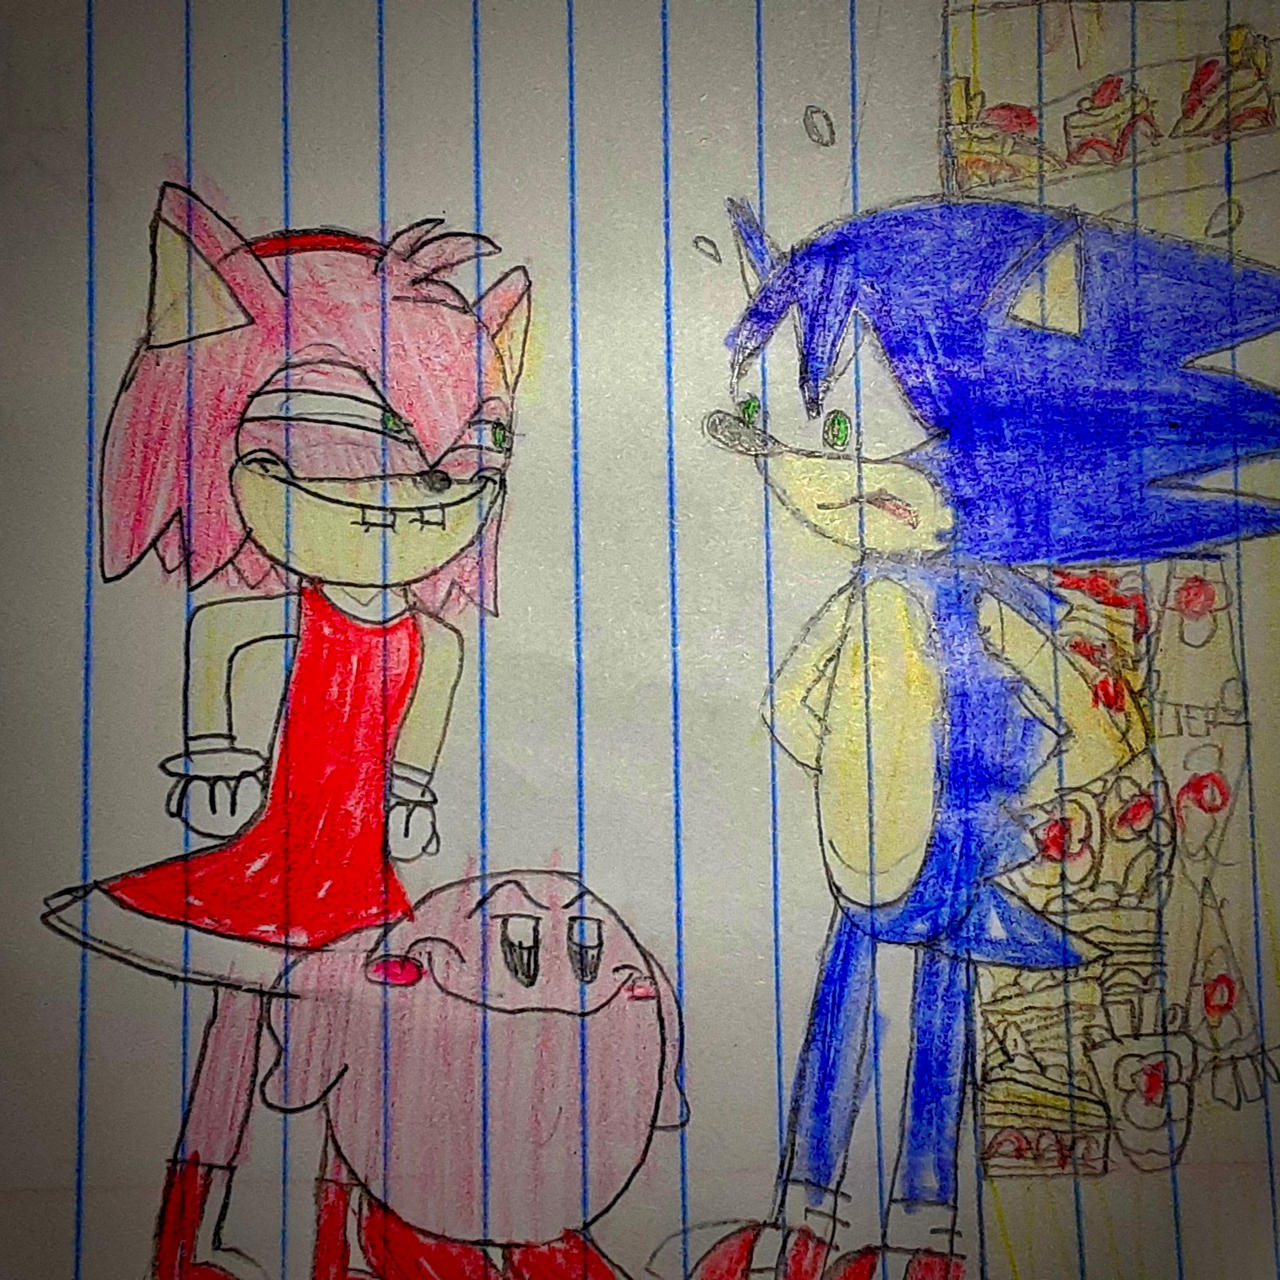 Oodles of Doodles — sonic not liking amy's strawberry shortcake is